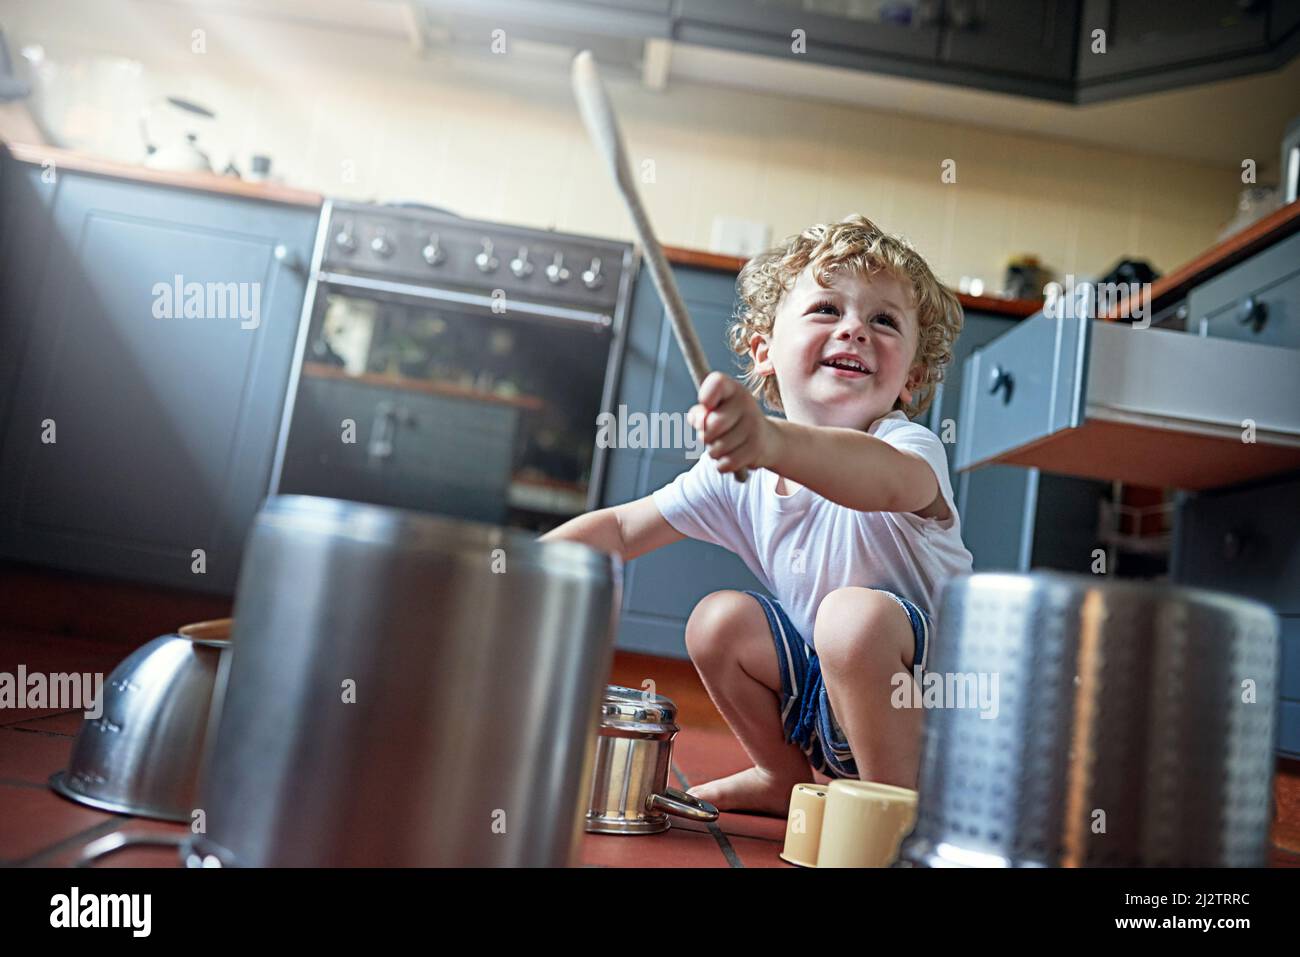 You might call it noise, but kids call it fun. Shot of an adorable little boy playing drums on a set of pots in the kitchen. Stock Photo